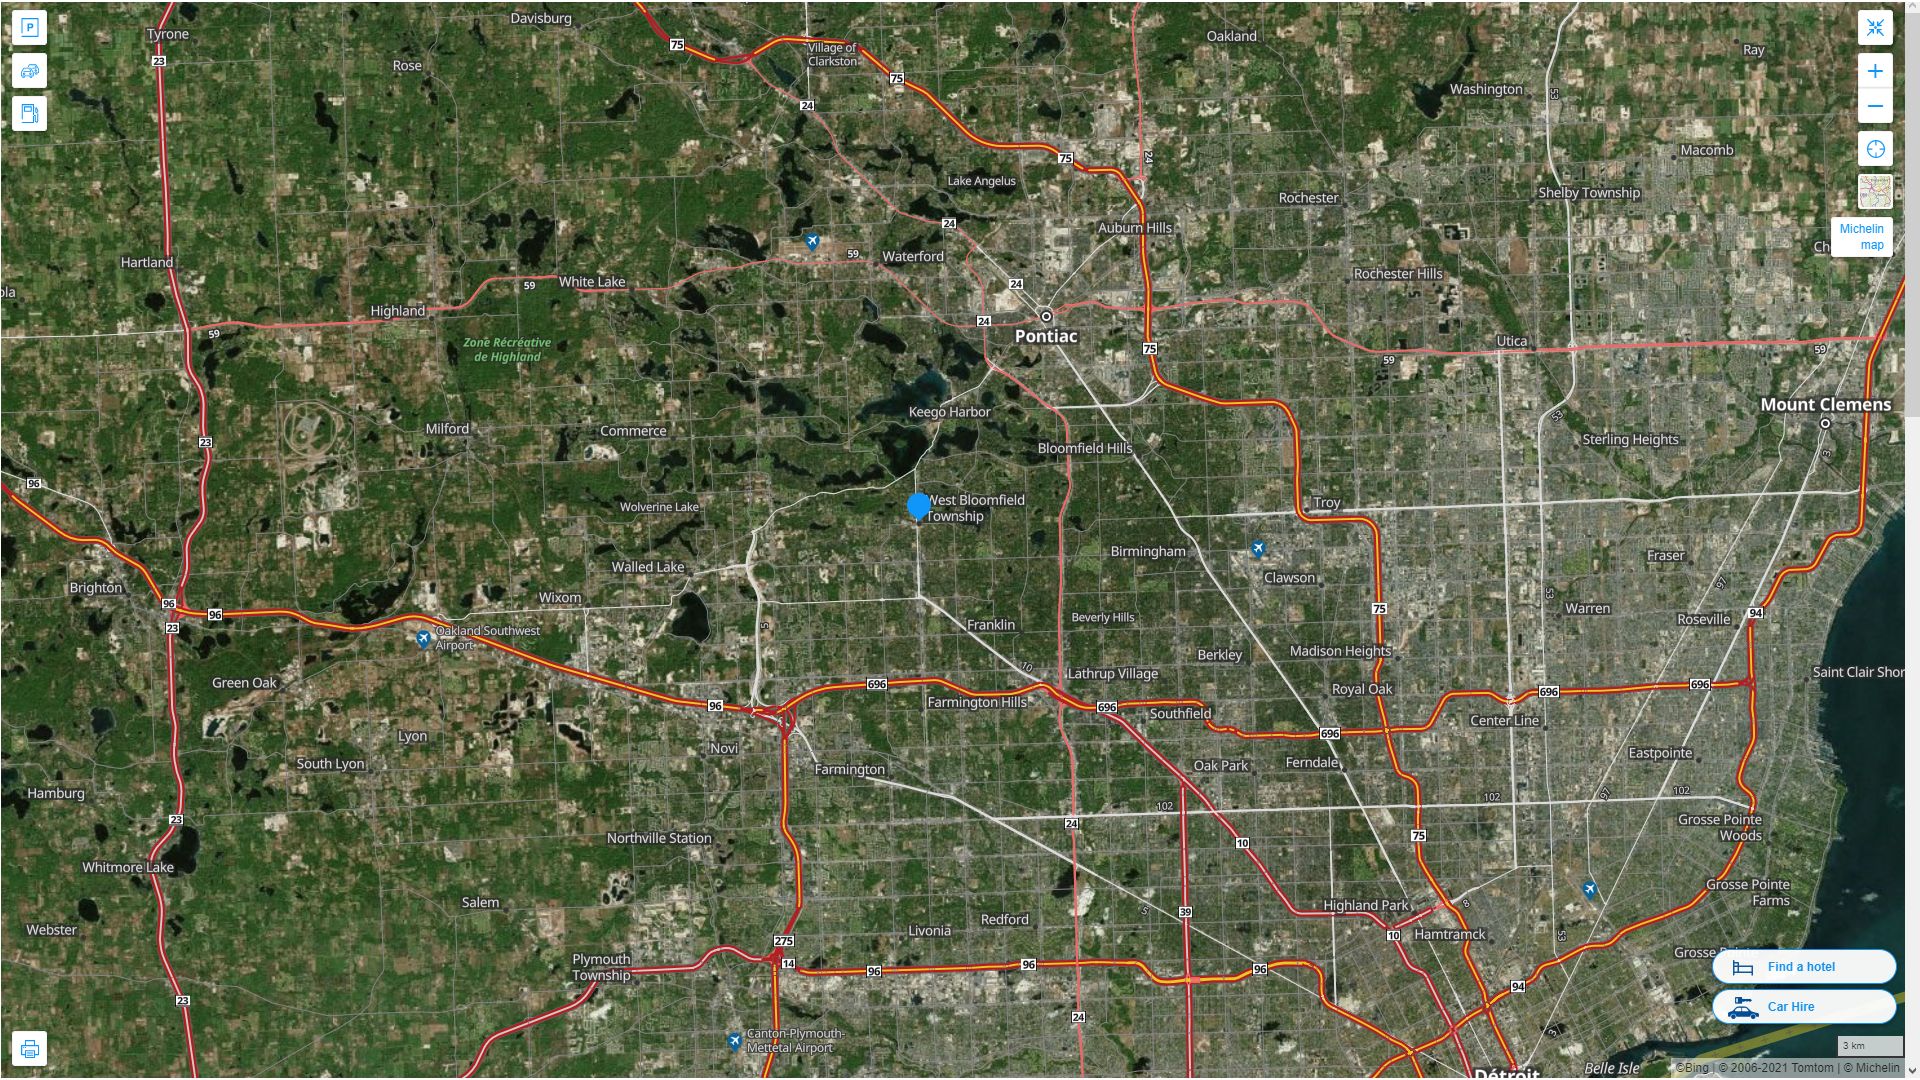 West Bloomfield Township Michigan Highway and Road Map with Satellite View